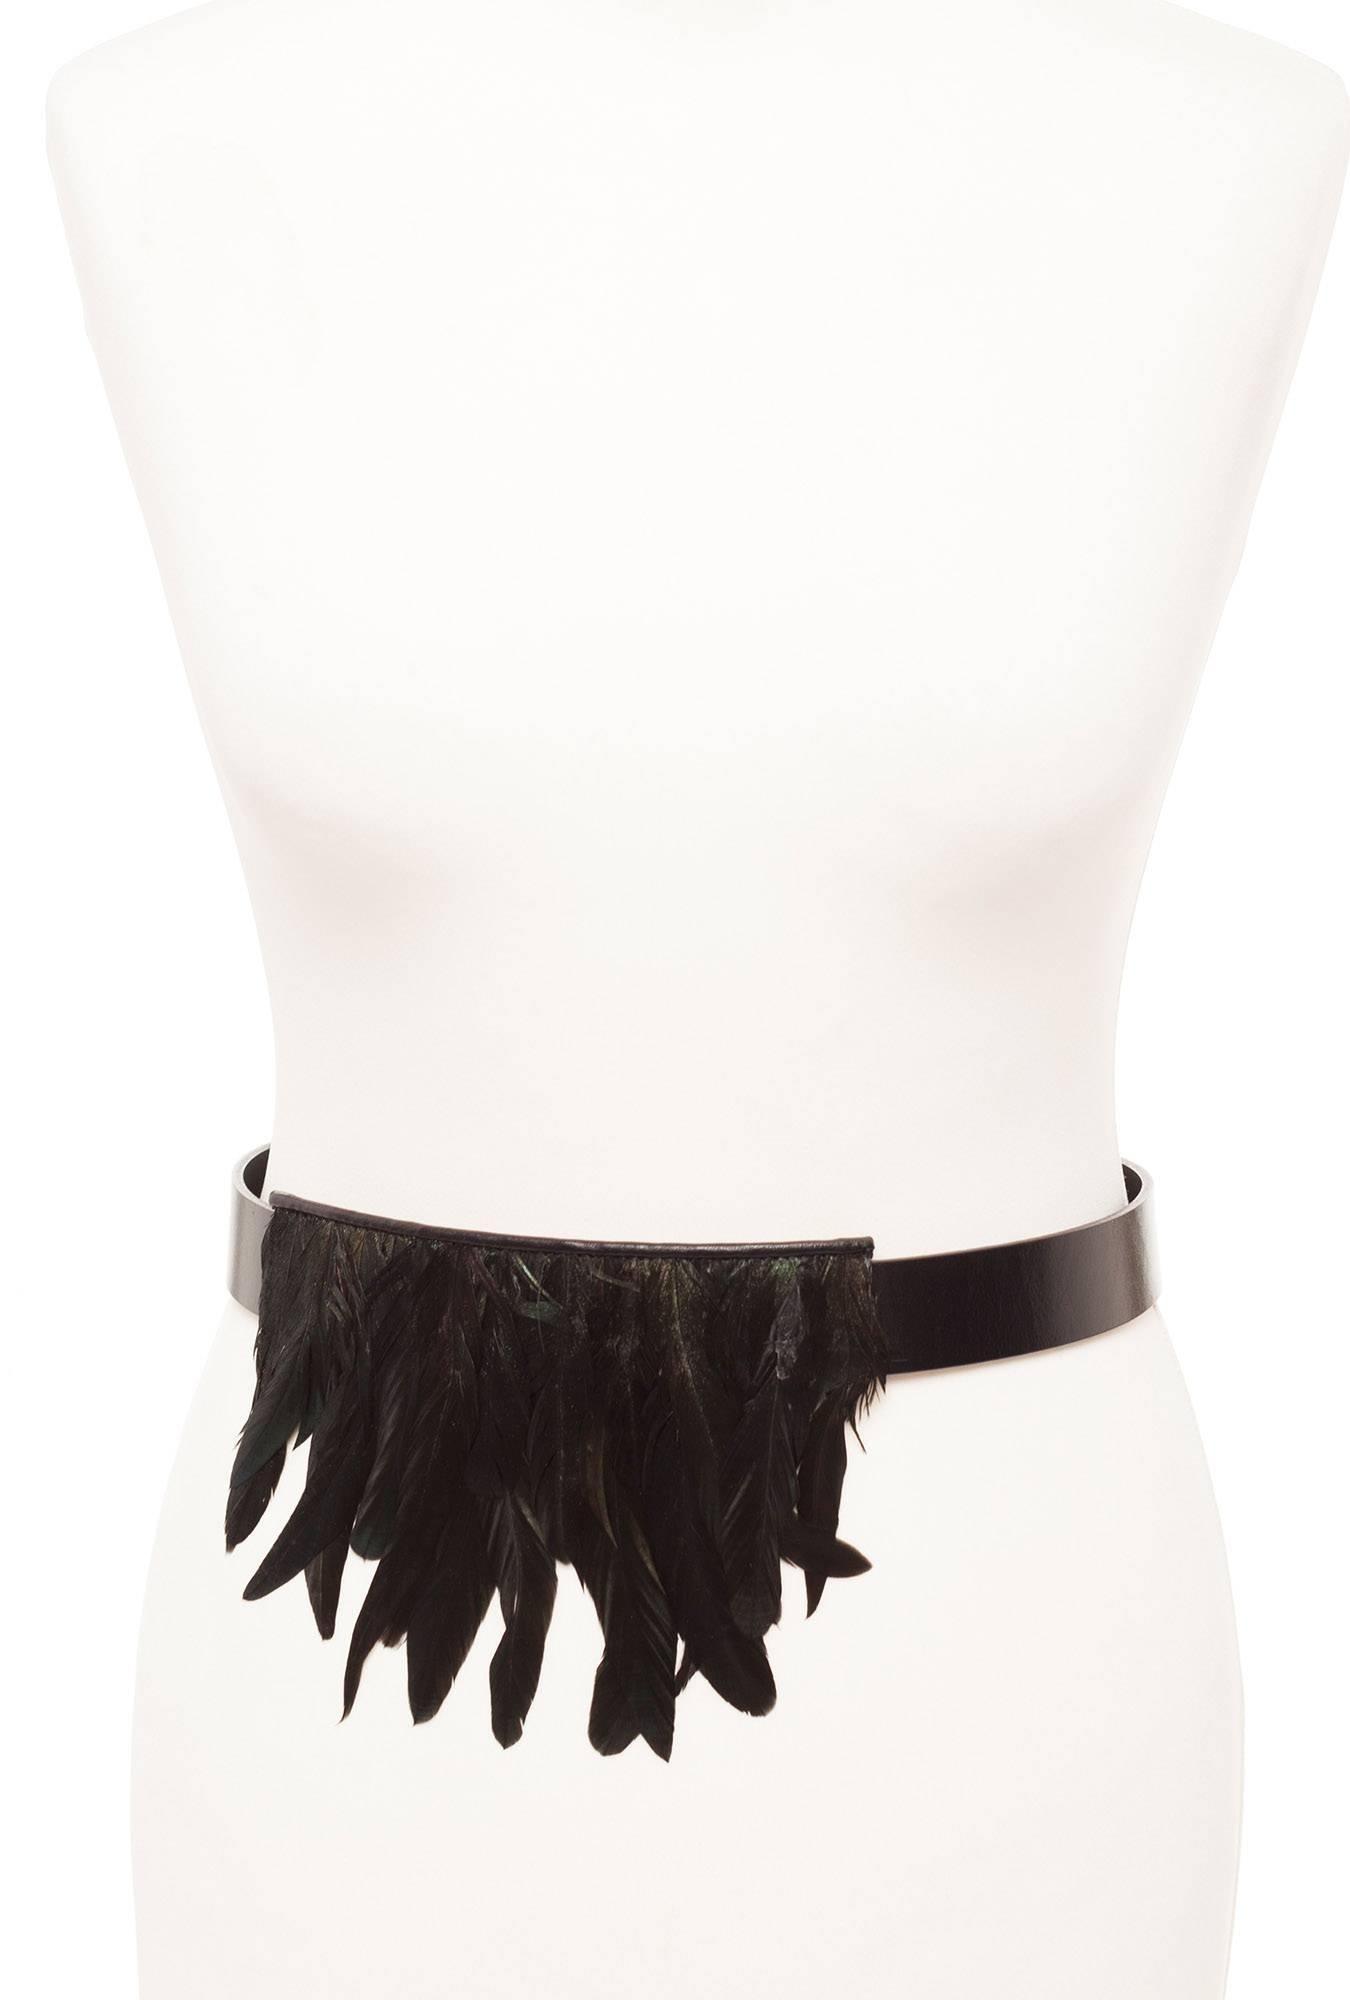 Martin Margiela leather belt with feather front detail, Sz. M 2